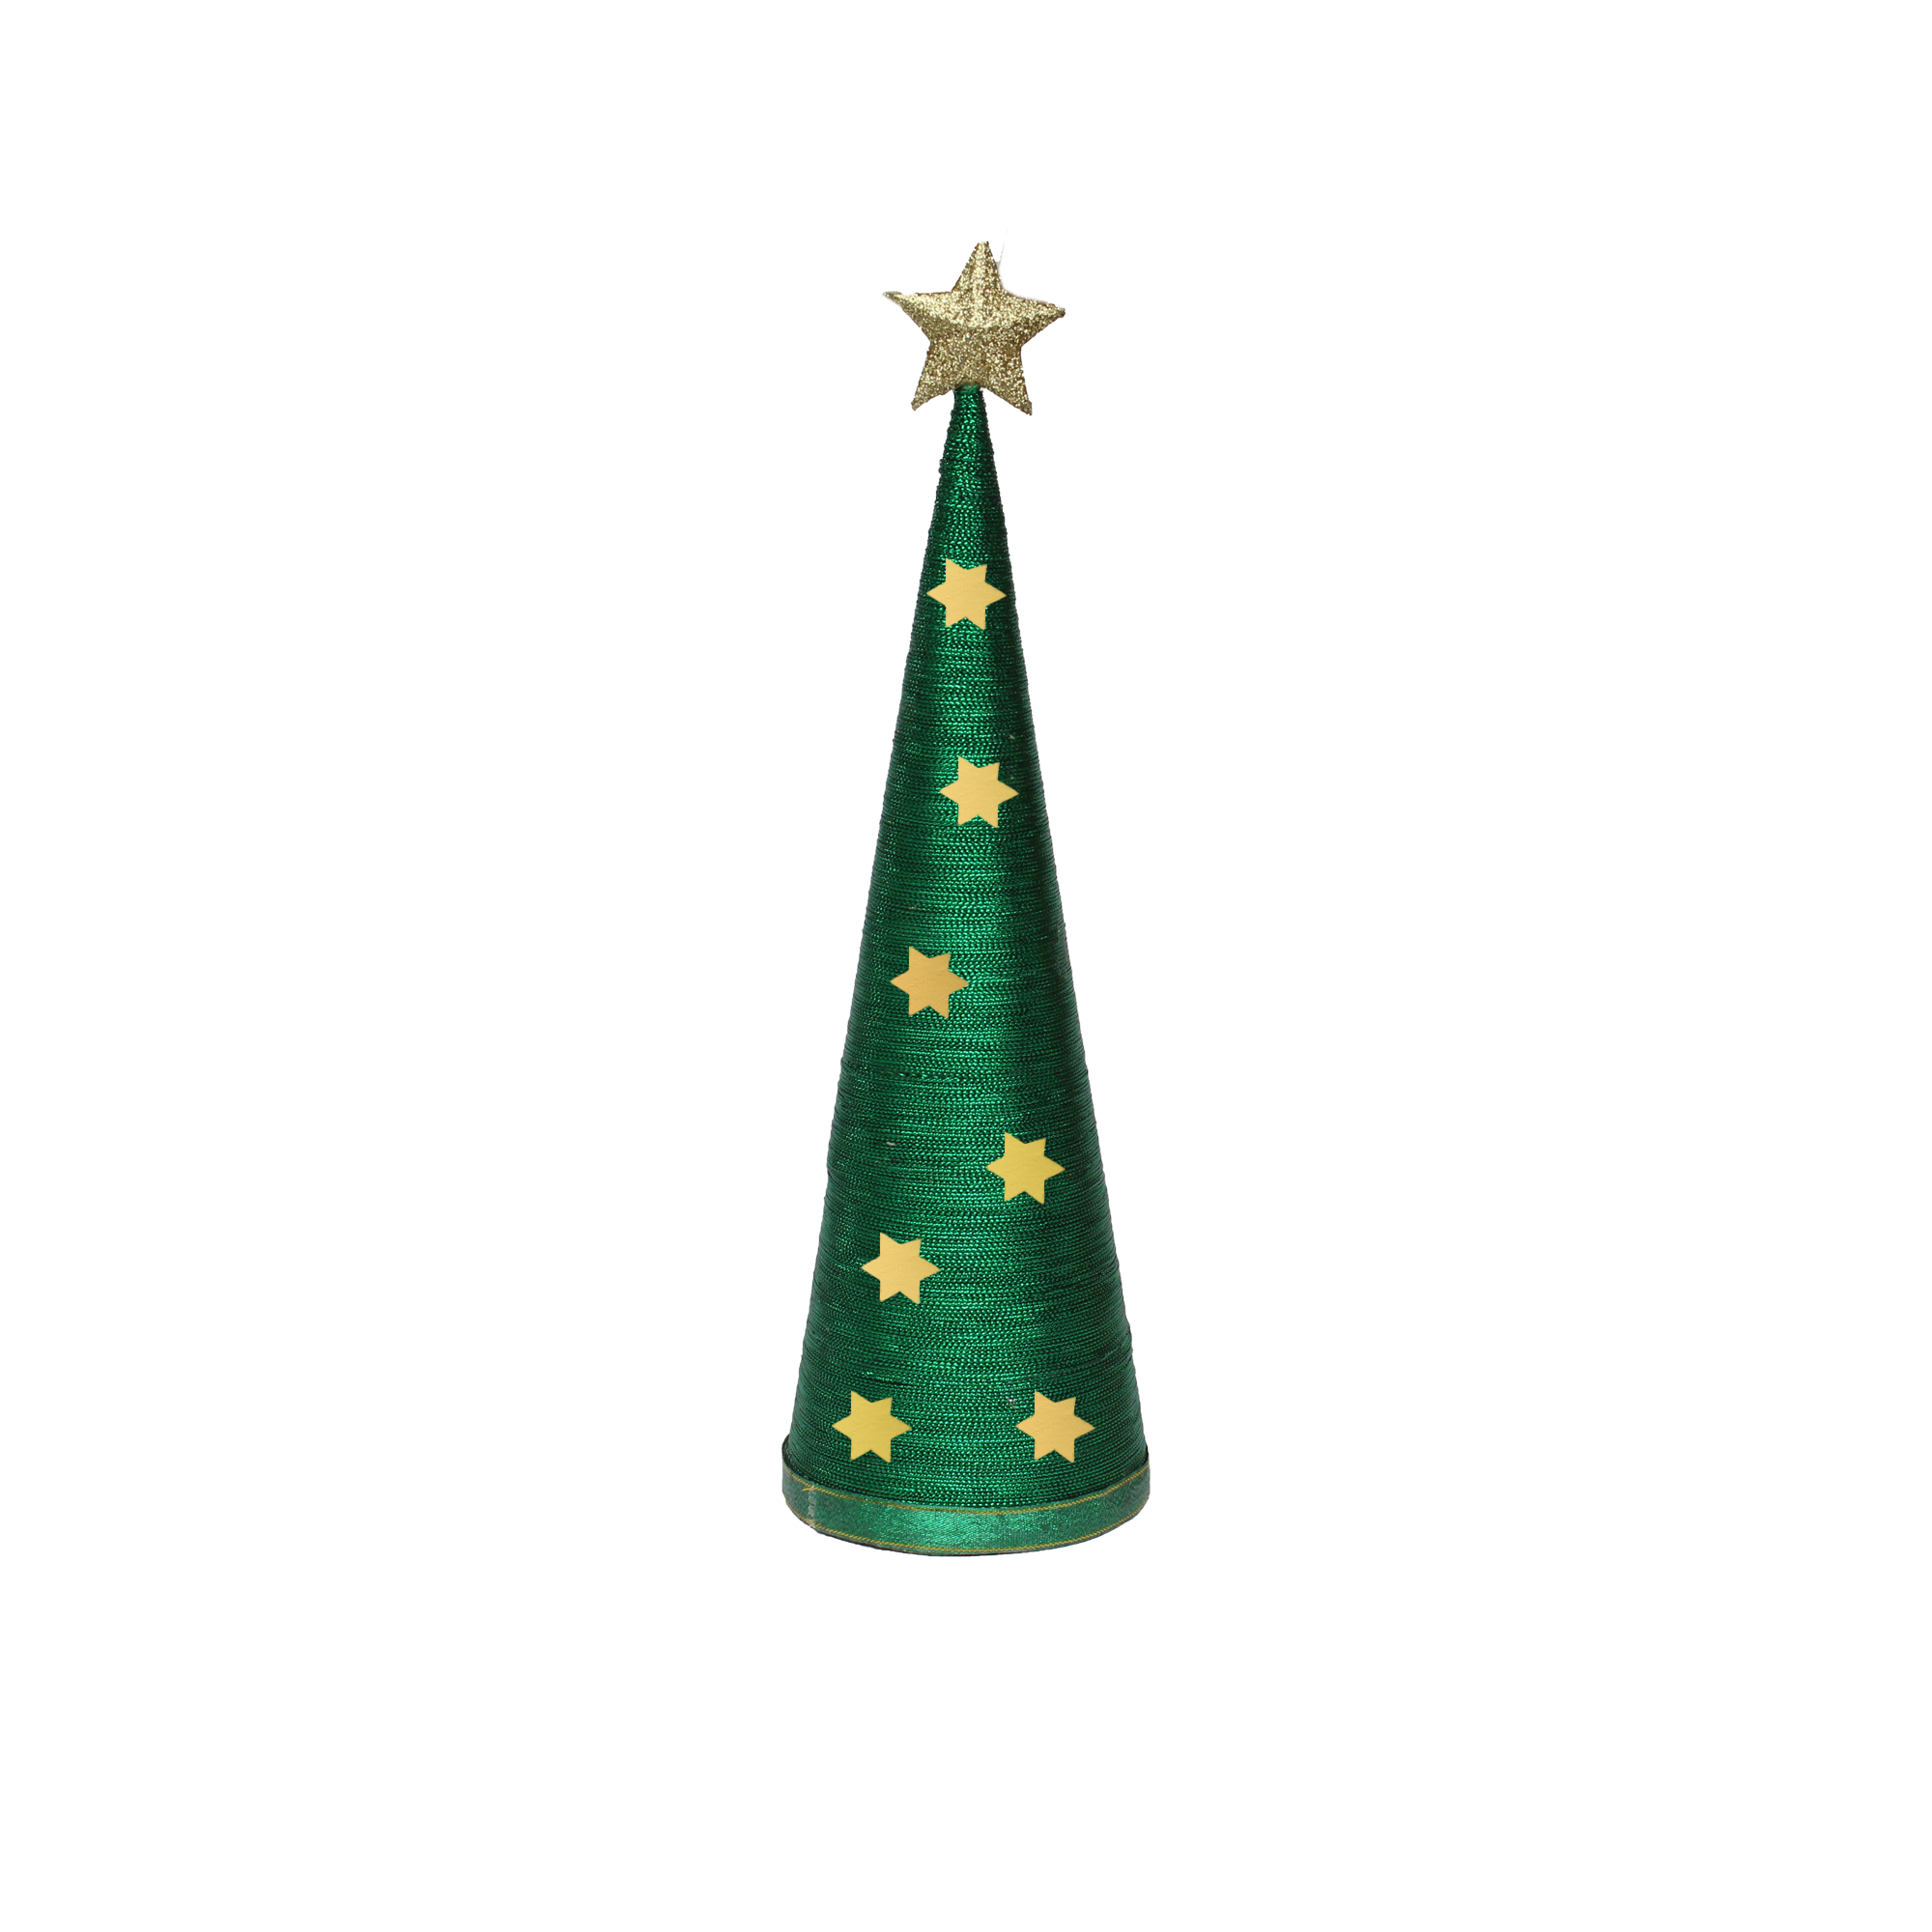 Handmade Conical Christmas Lurex Tree with Sequins and Star - Height 14.5 X Width4inch, Green, 1pc